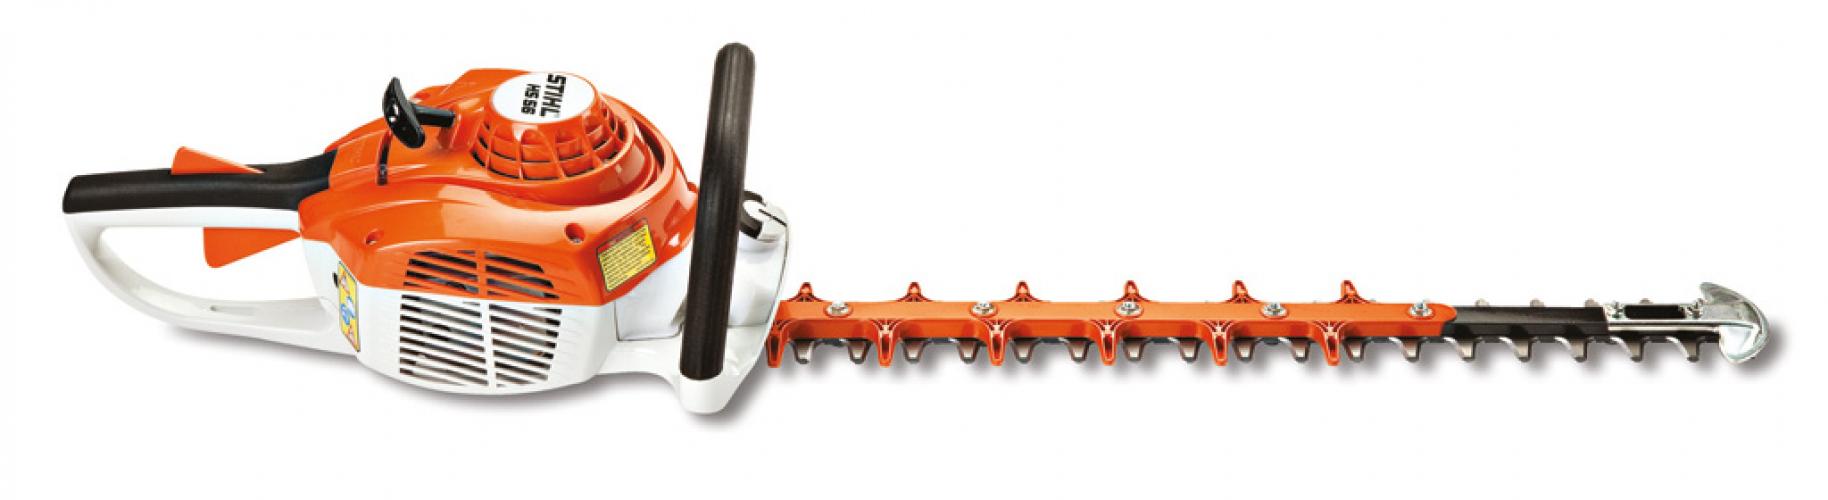 HS 56 24" Gas Hedge Trimmer